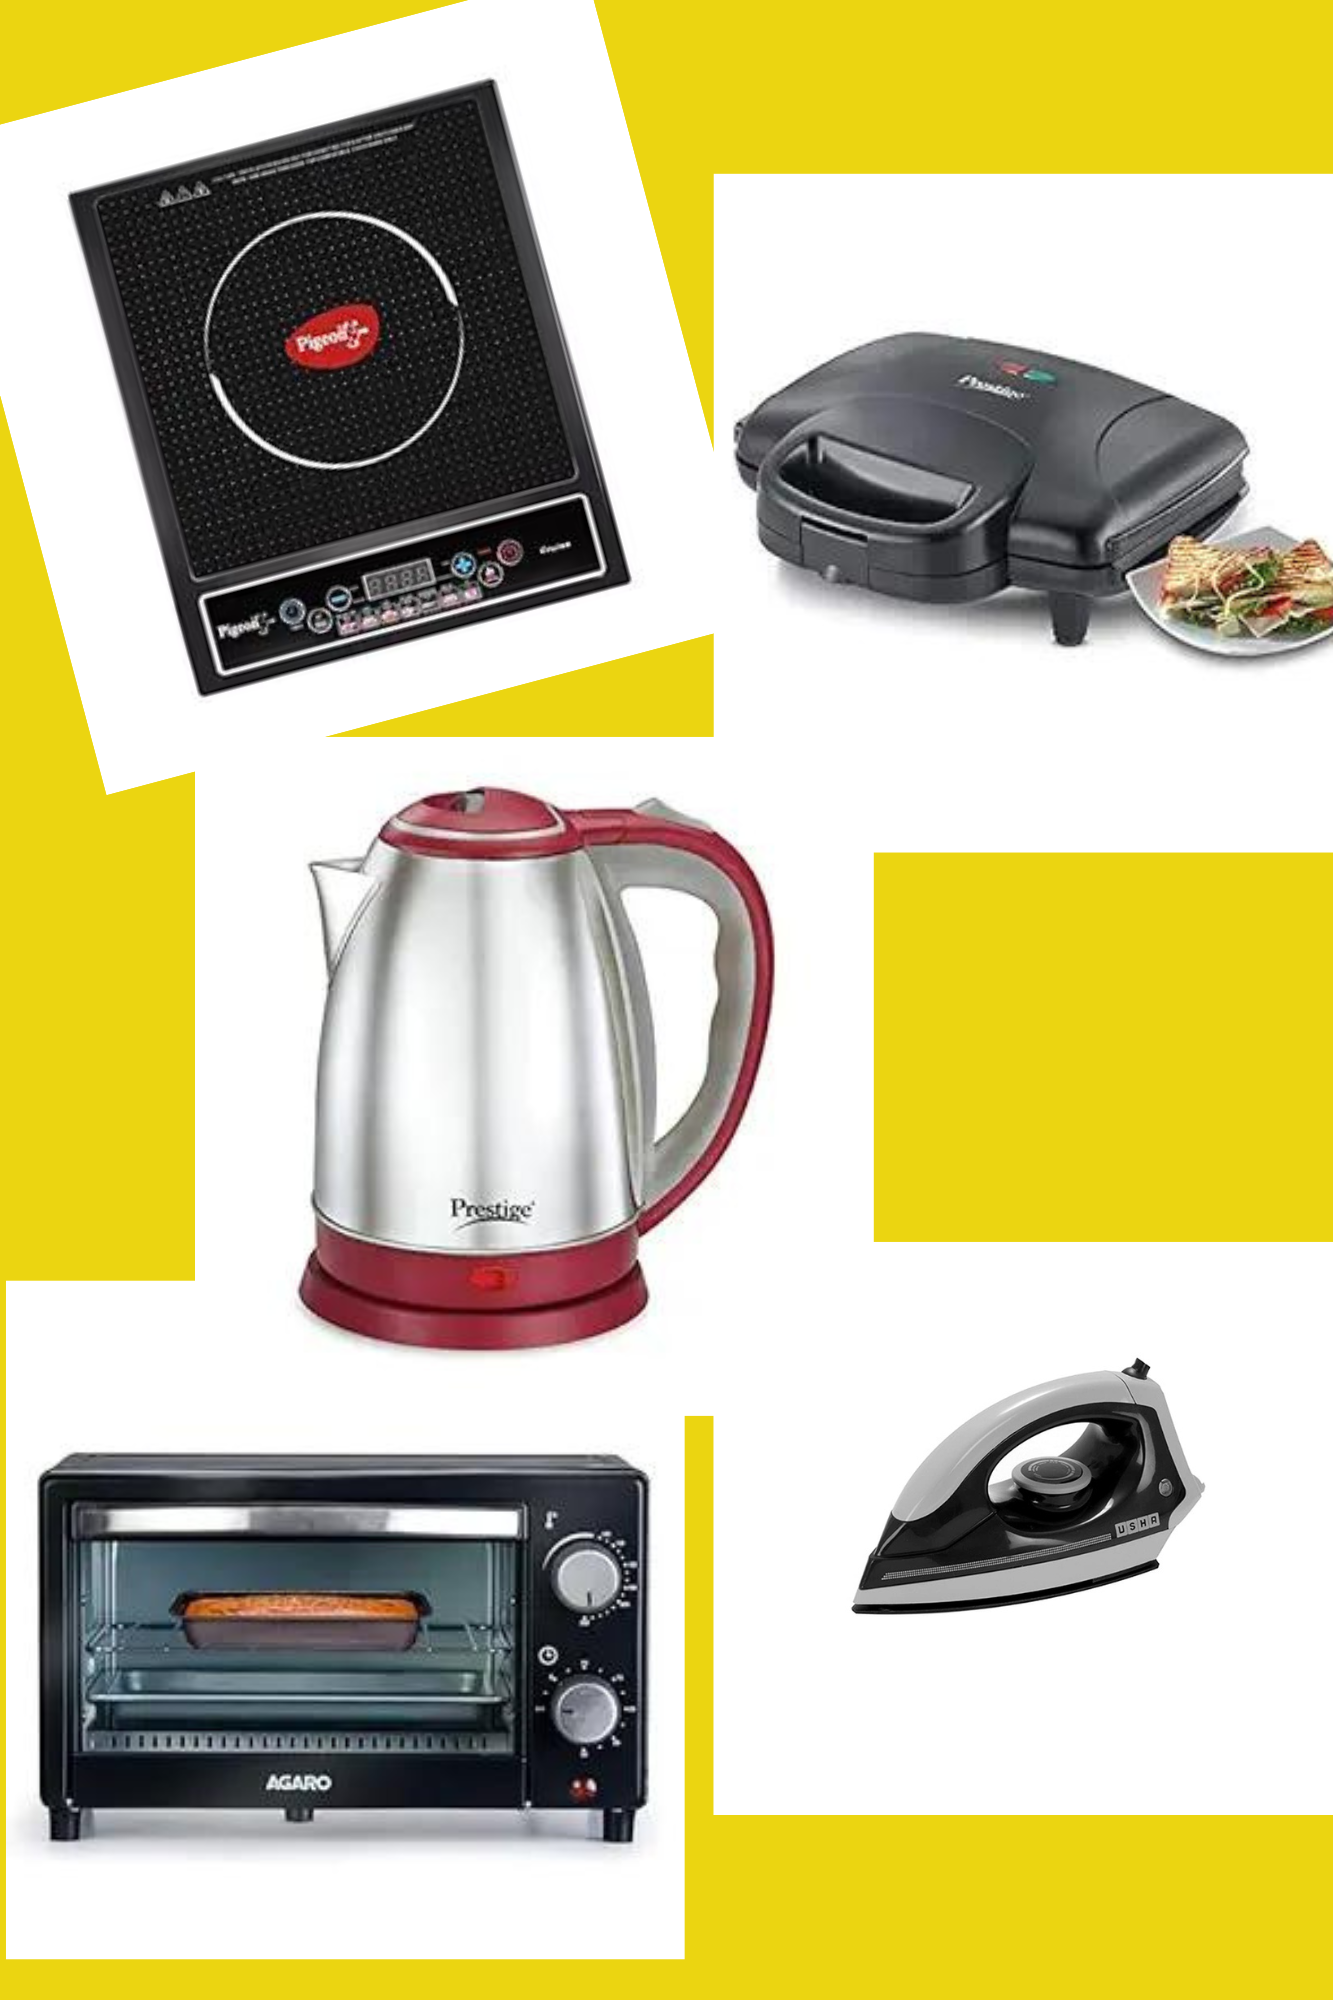 2019 Holiday Gift Guide | Electronics & Small Appliances - Shine Your Light